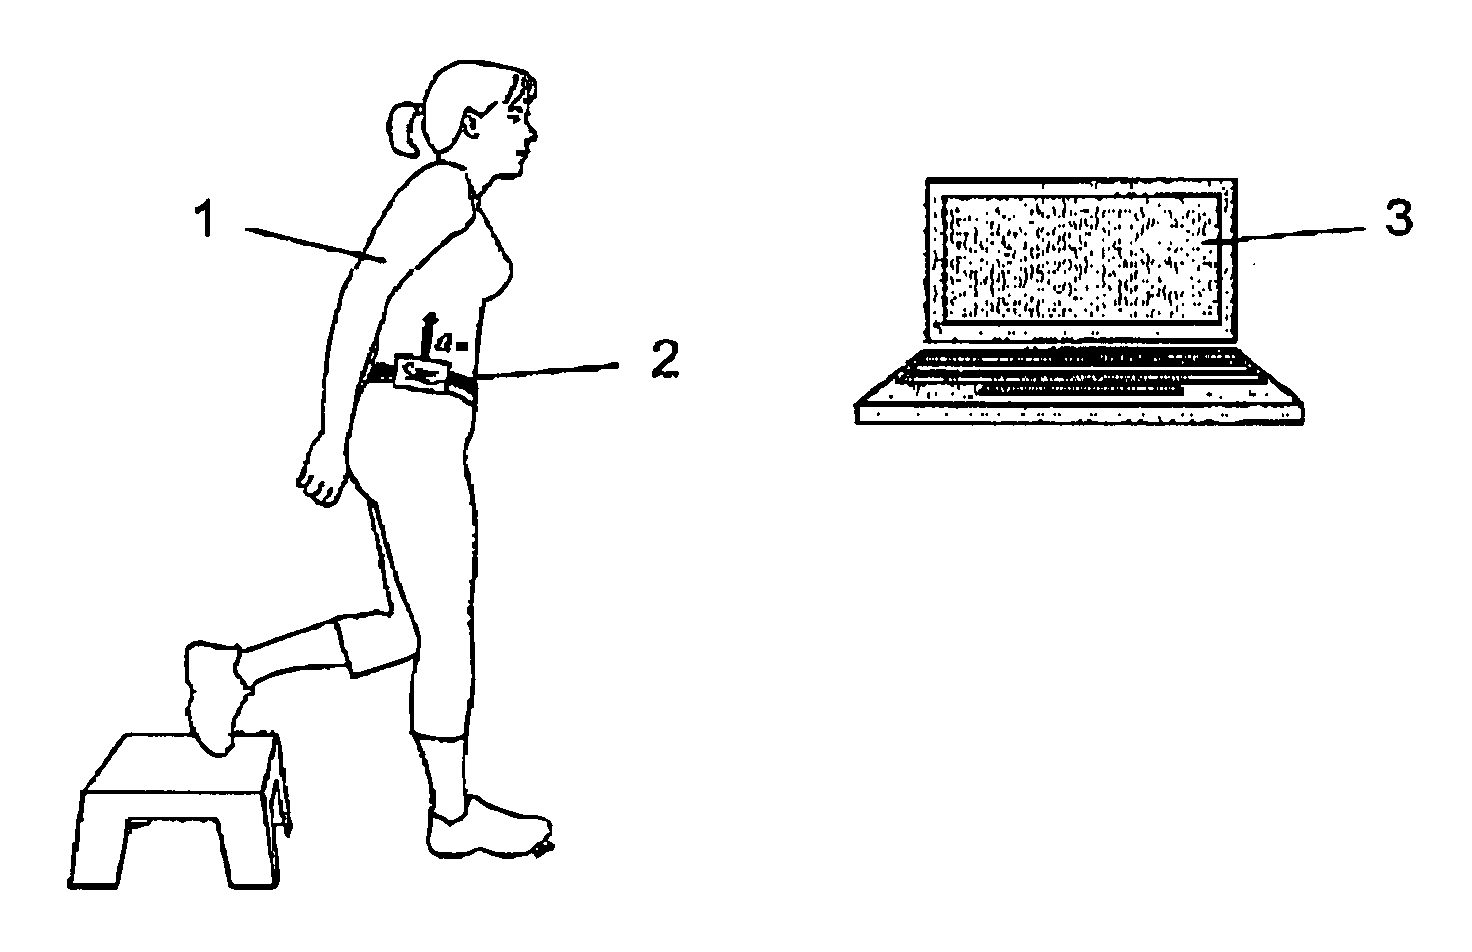 Method and device arrangement for measuring physical exercise promoting cholesterol metabolism